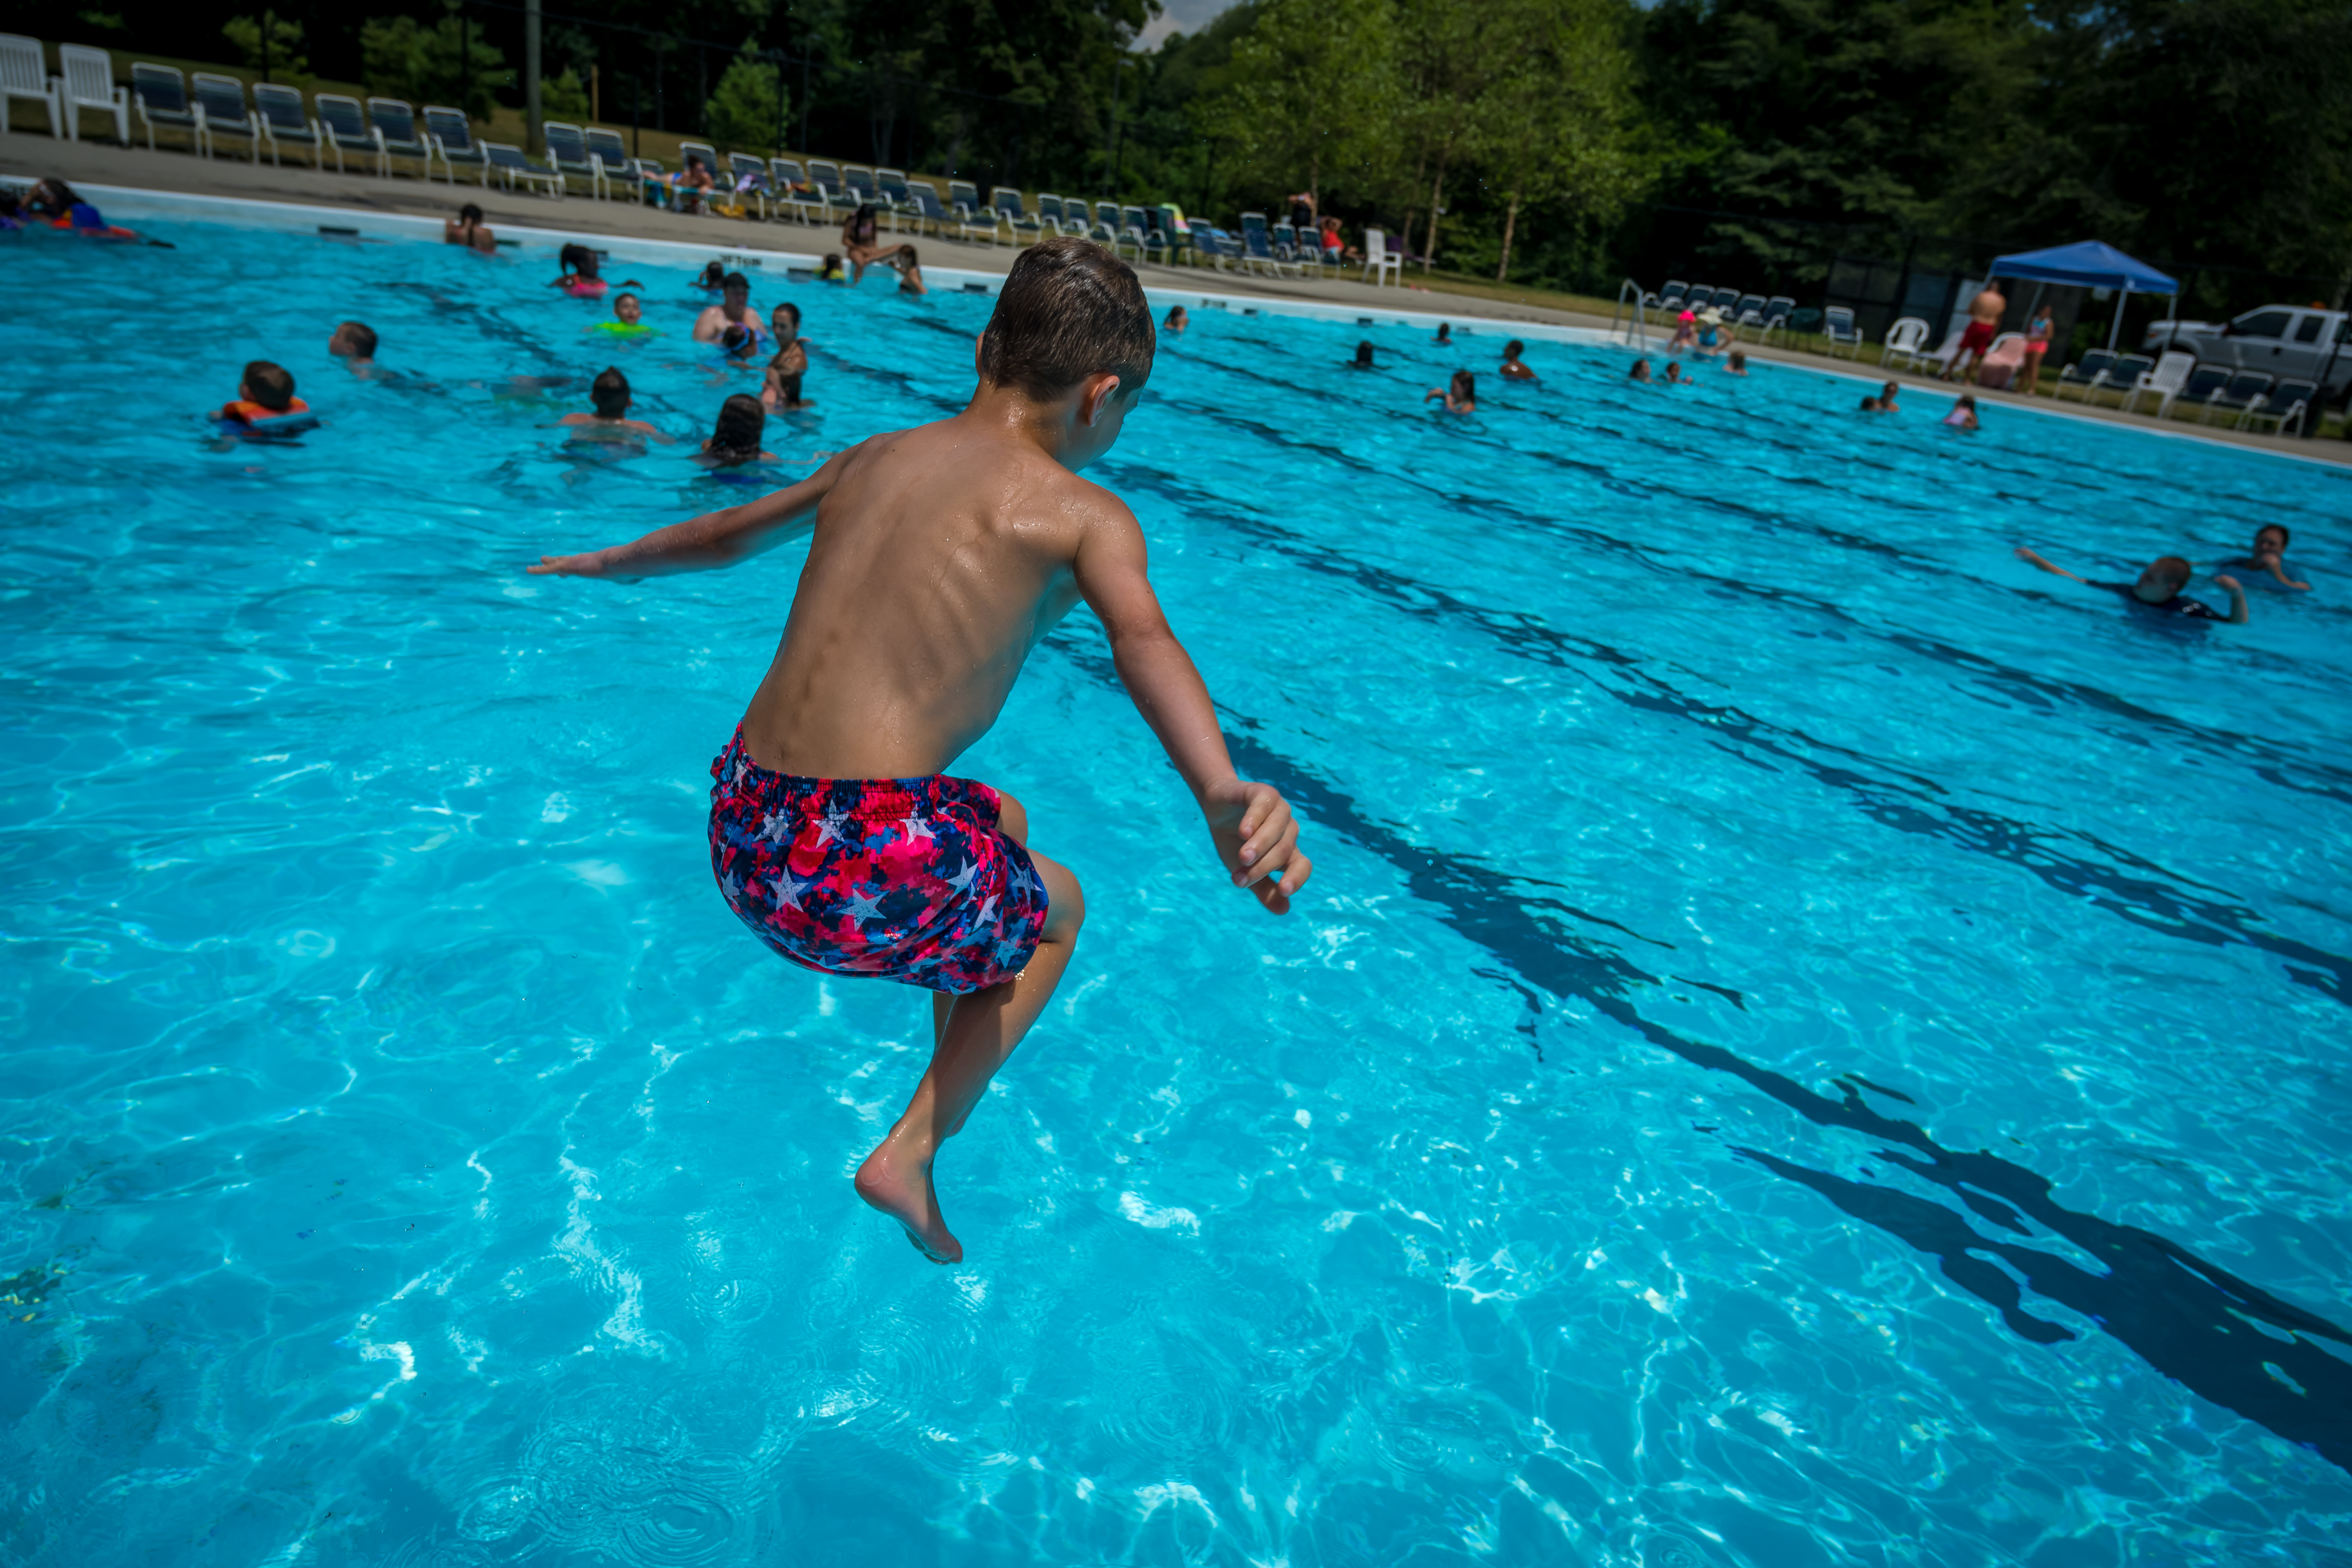 A young boy seen with arms outstretched and knees tucker as he hovers over the pool in mid air, about to crash into the blue sparkling water